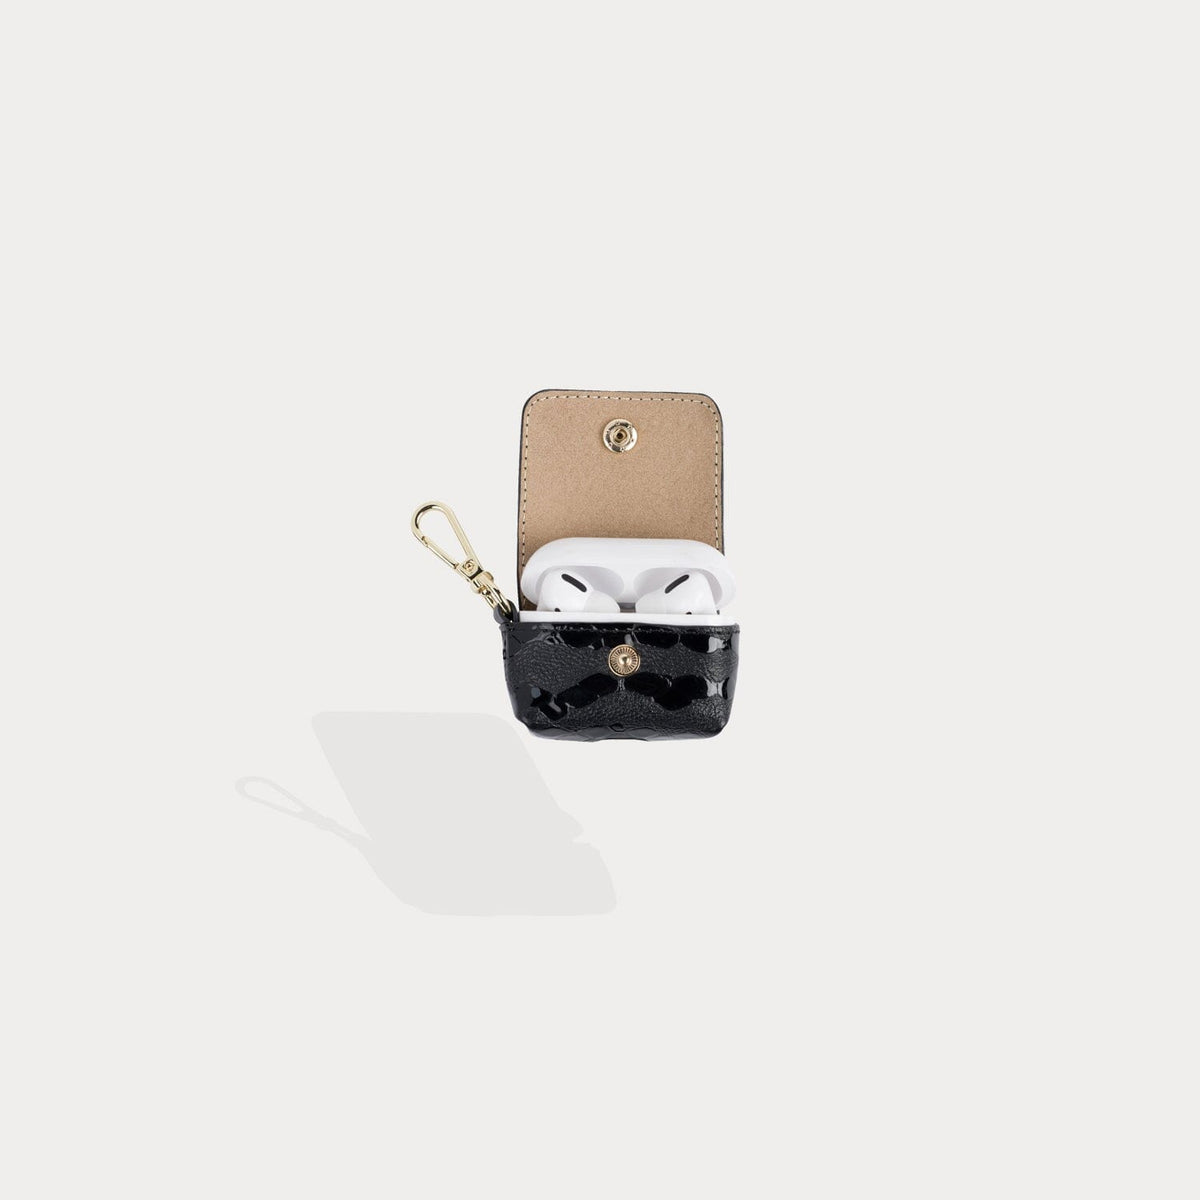 Buy Airpods 3 Case Lv devices online